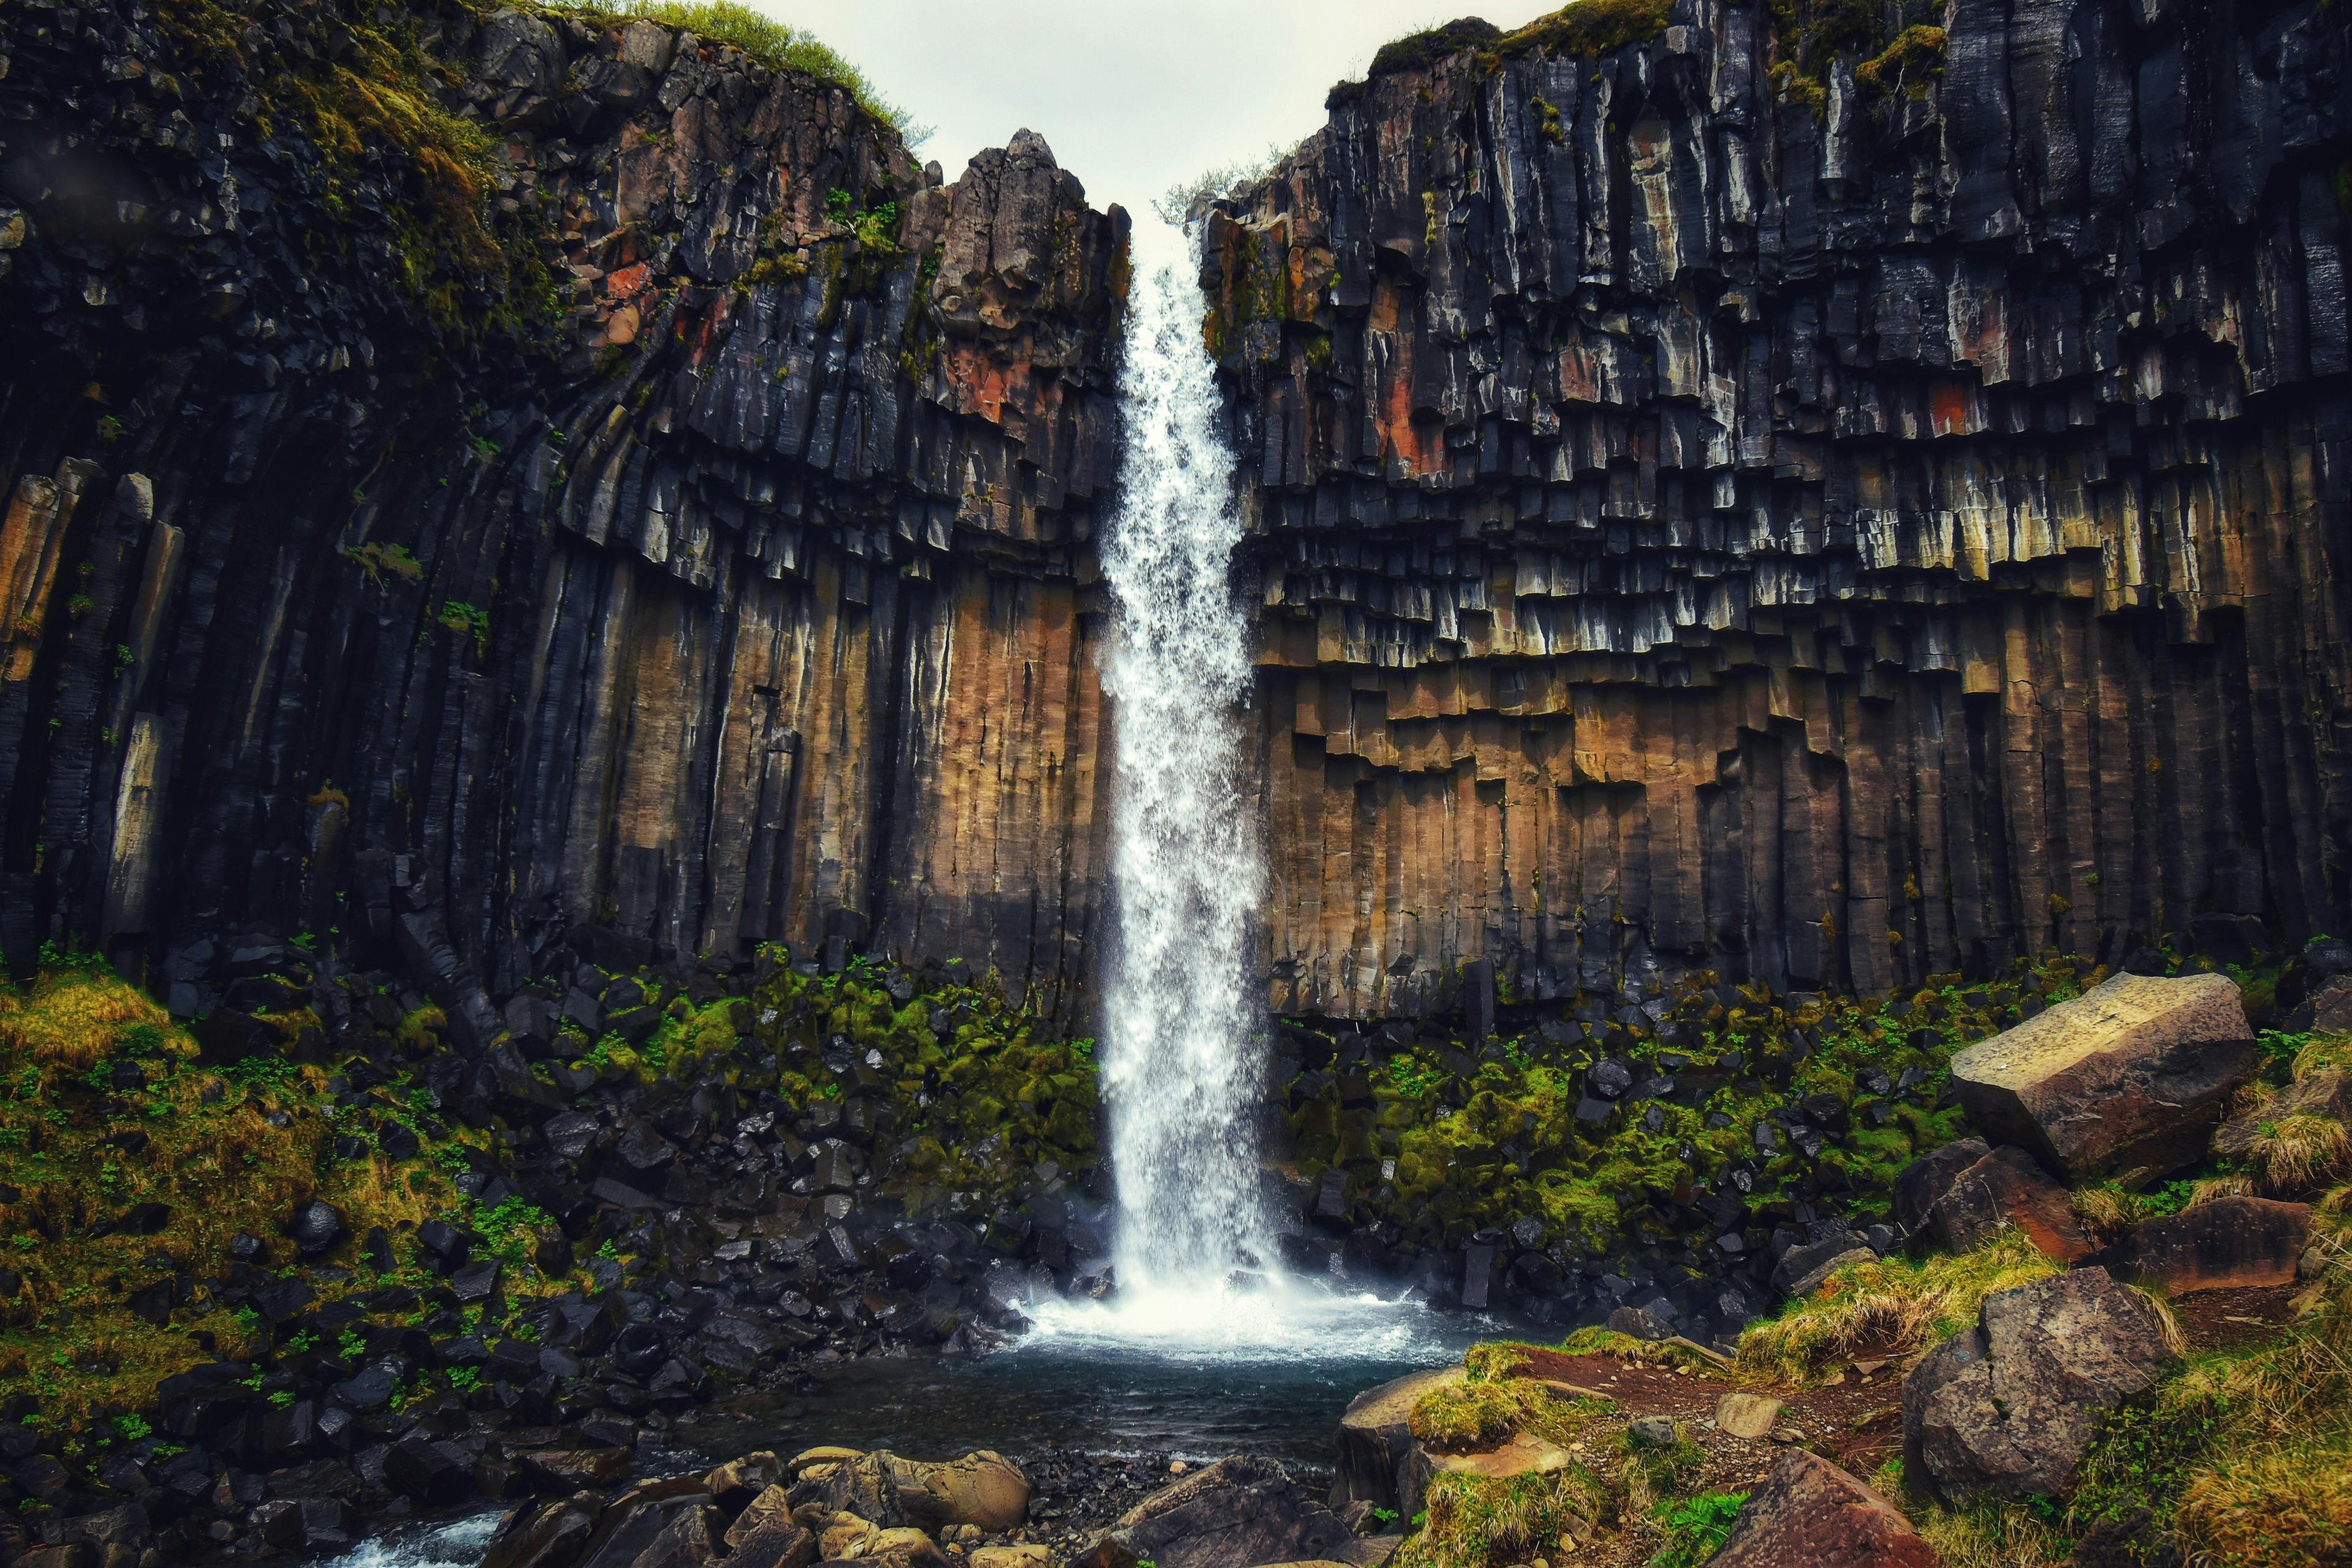 A majestic waterfall descending from a height, framed by striking columnar basalt formations, with lush greenery and rocks at its base.